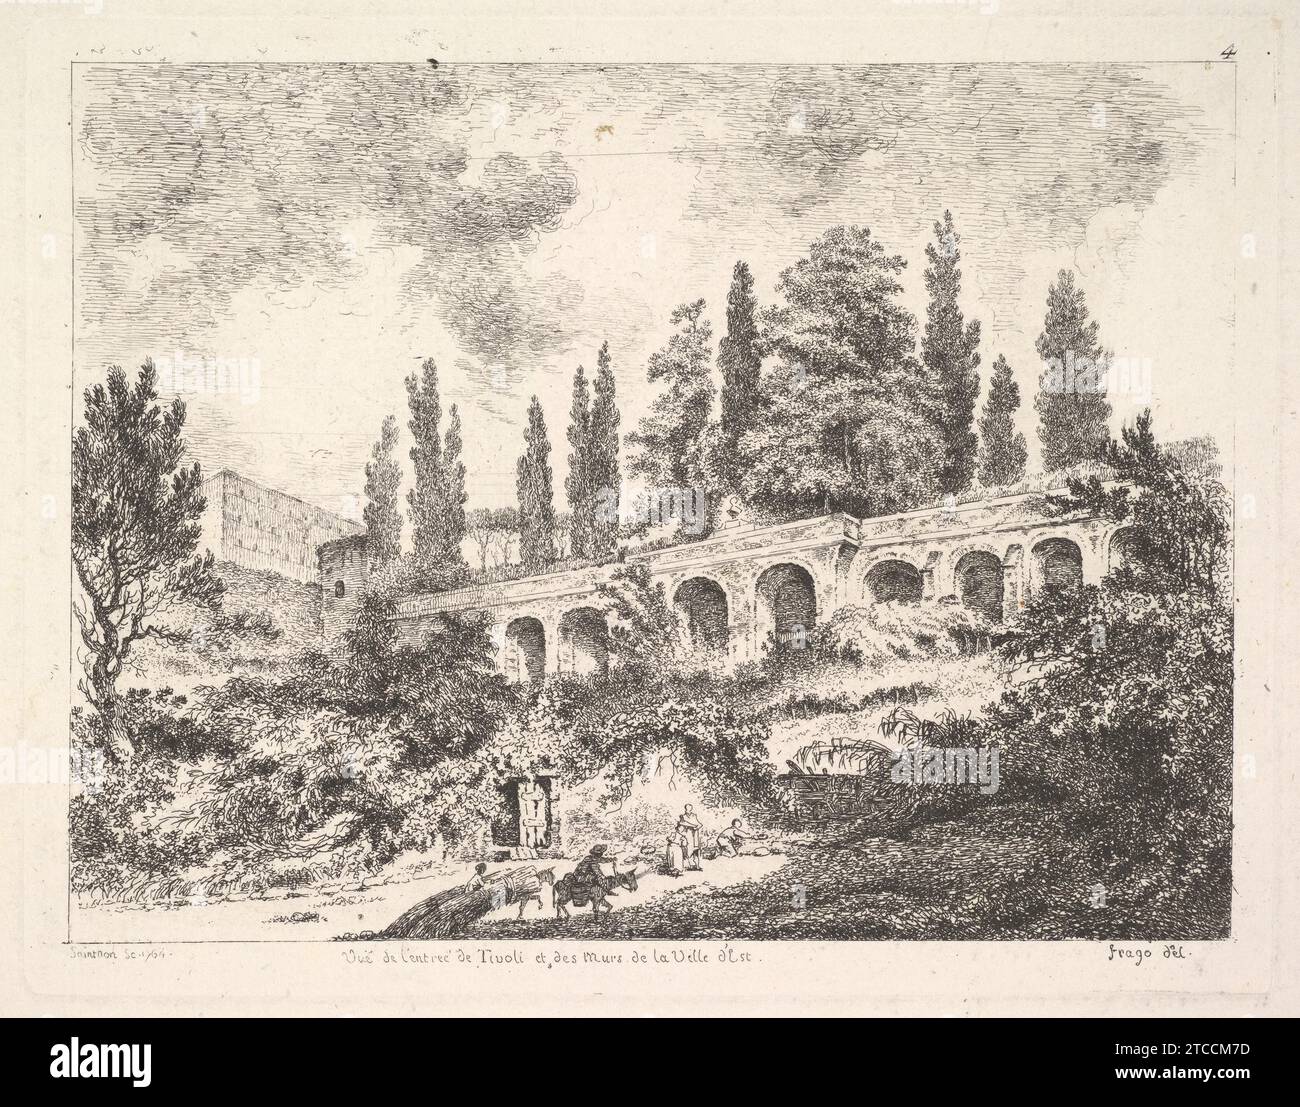 View of the entrance to Tivoli and the walls of the Villa d'Este, horsemen approaching the entrance at bottom center, arched entrance in the middleground, cyrus trees and other plants surrounding 2012 by Jean Claude Richard, Abbe de Saint-Non Stock Photo